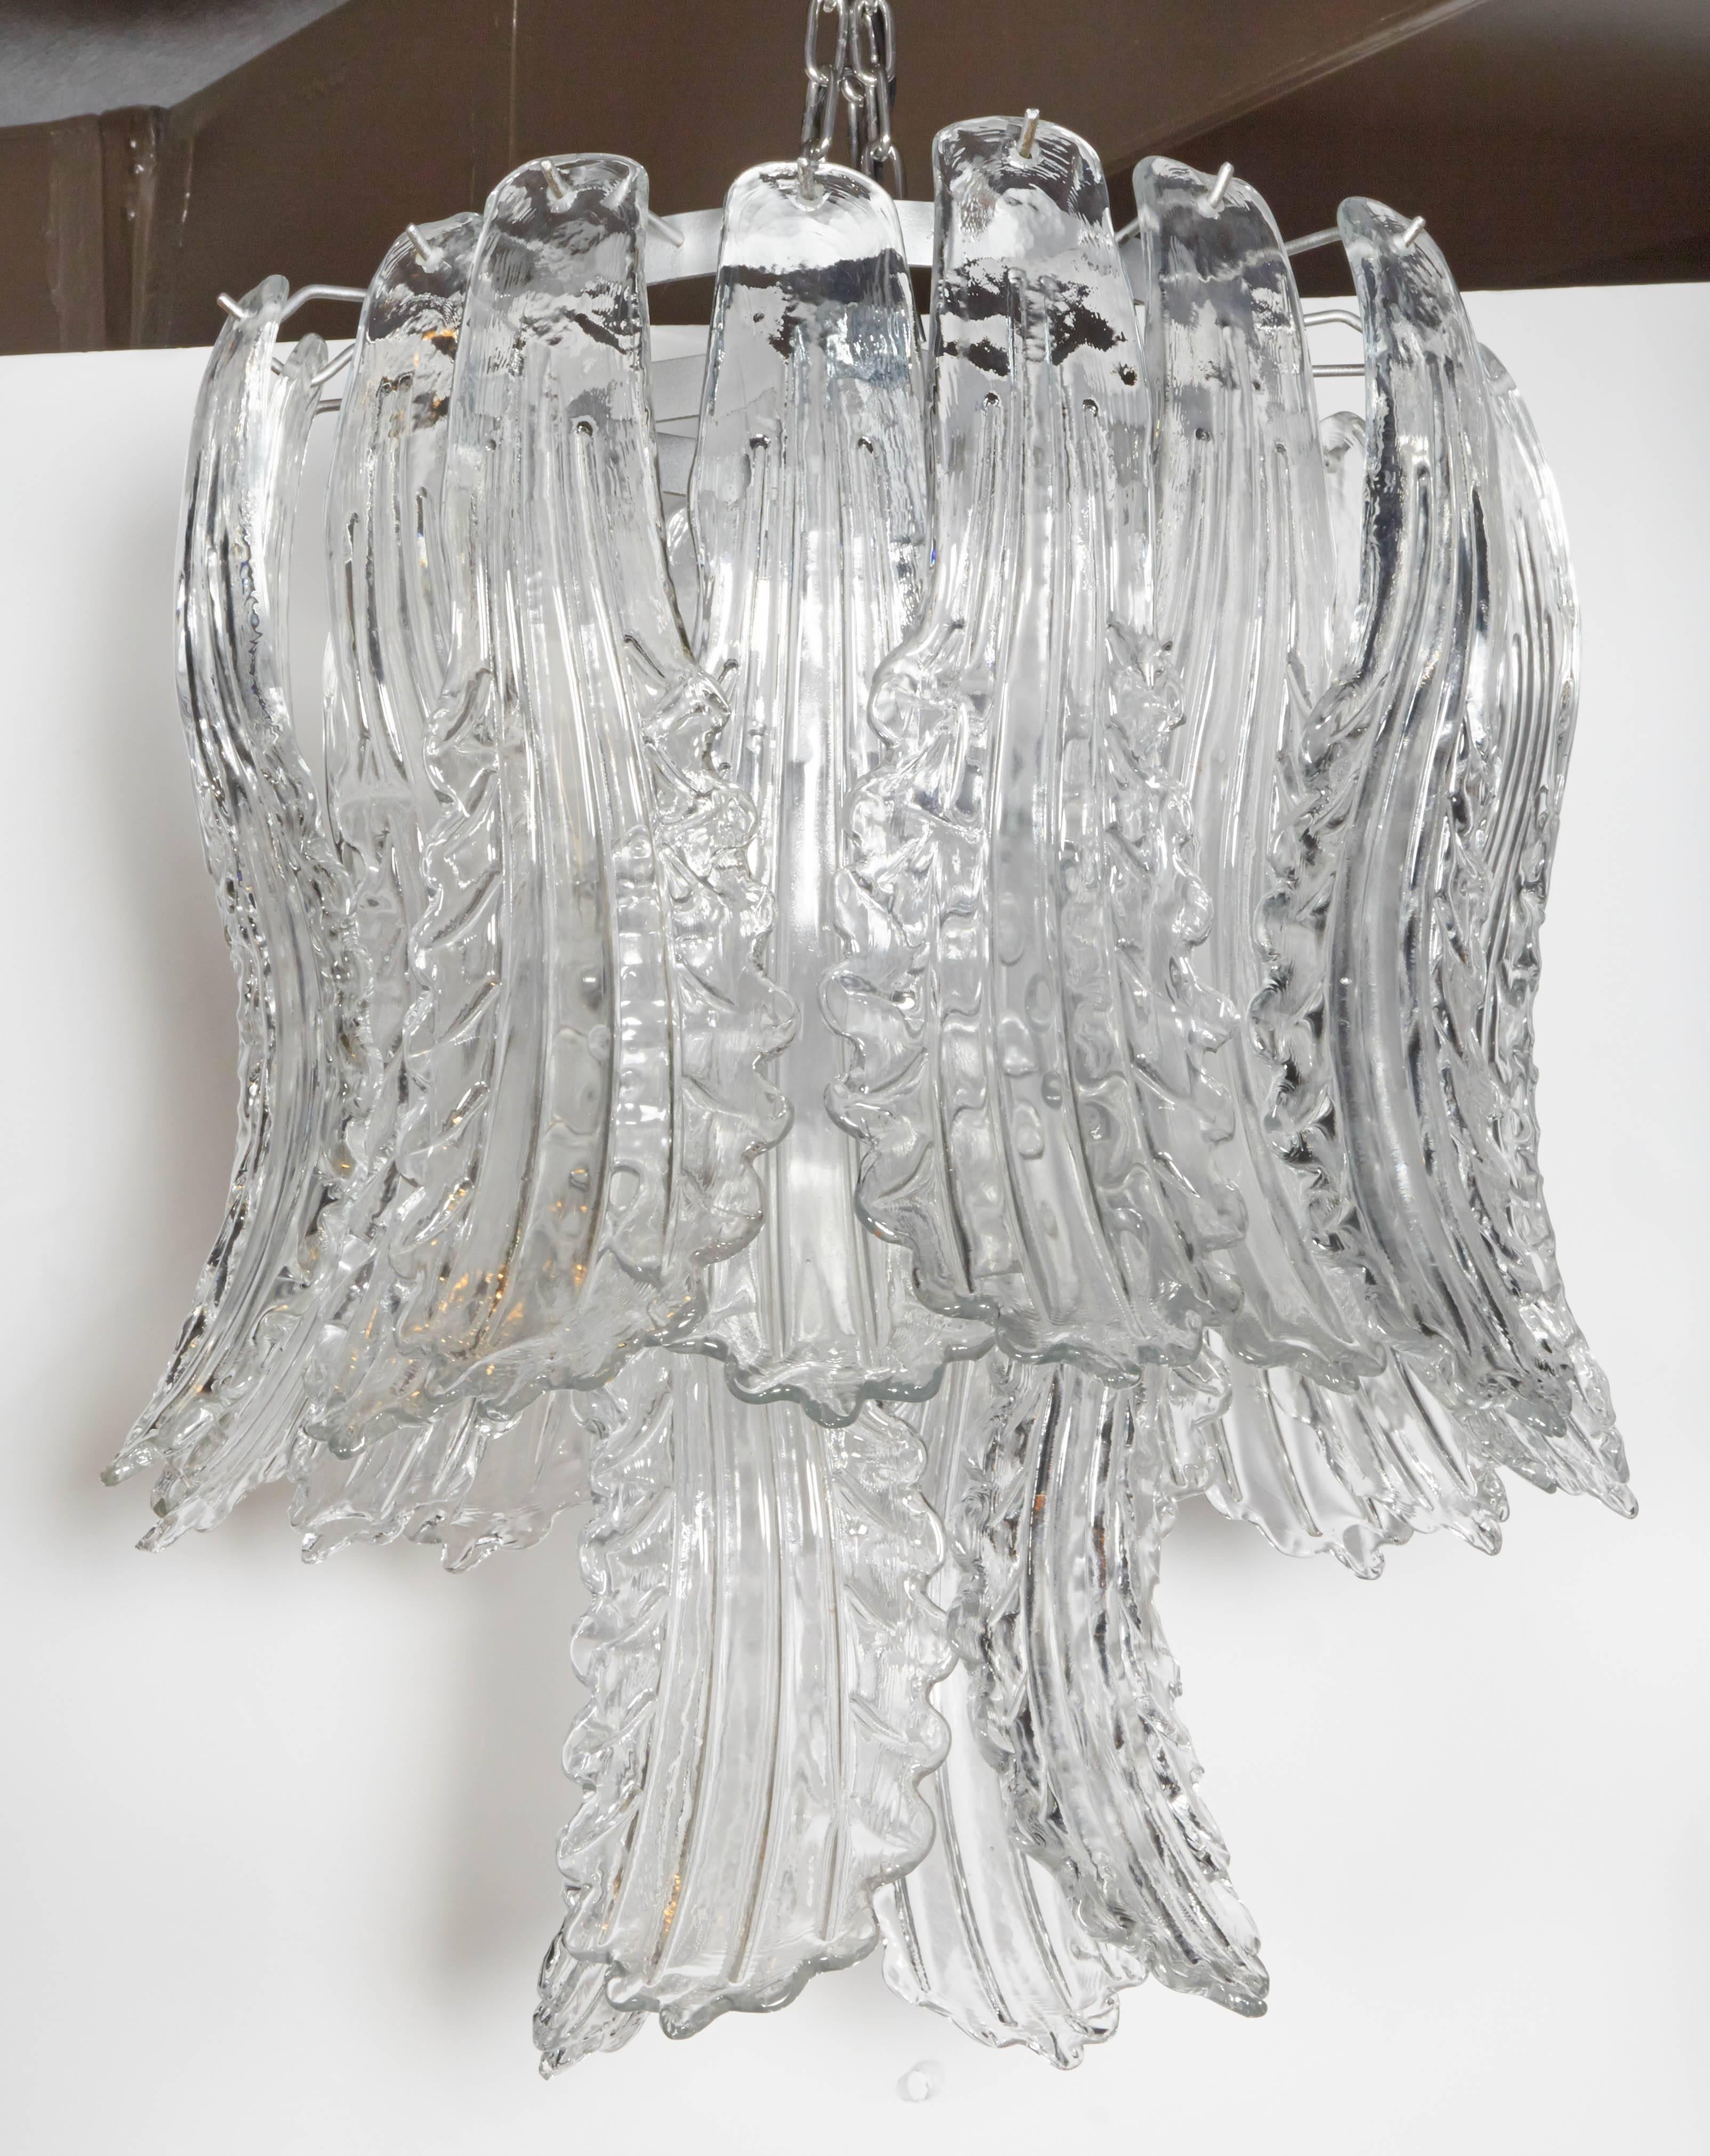 Hand-Crafted Exquisite Chandelier with Stylized Murano Glass Leaves by Barovier & Toso